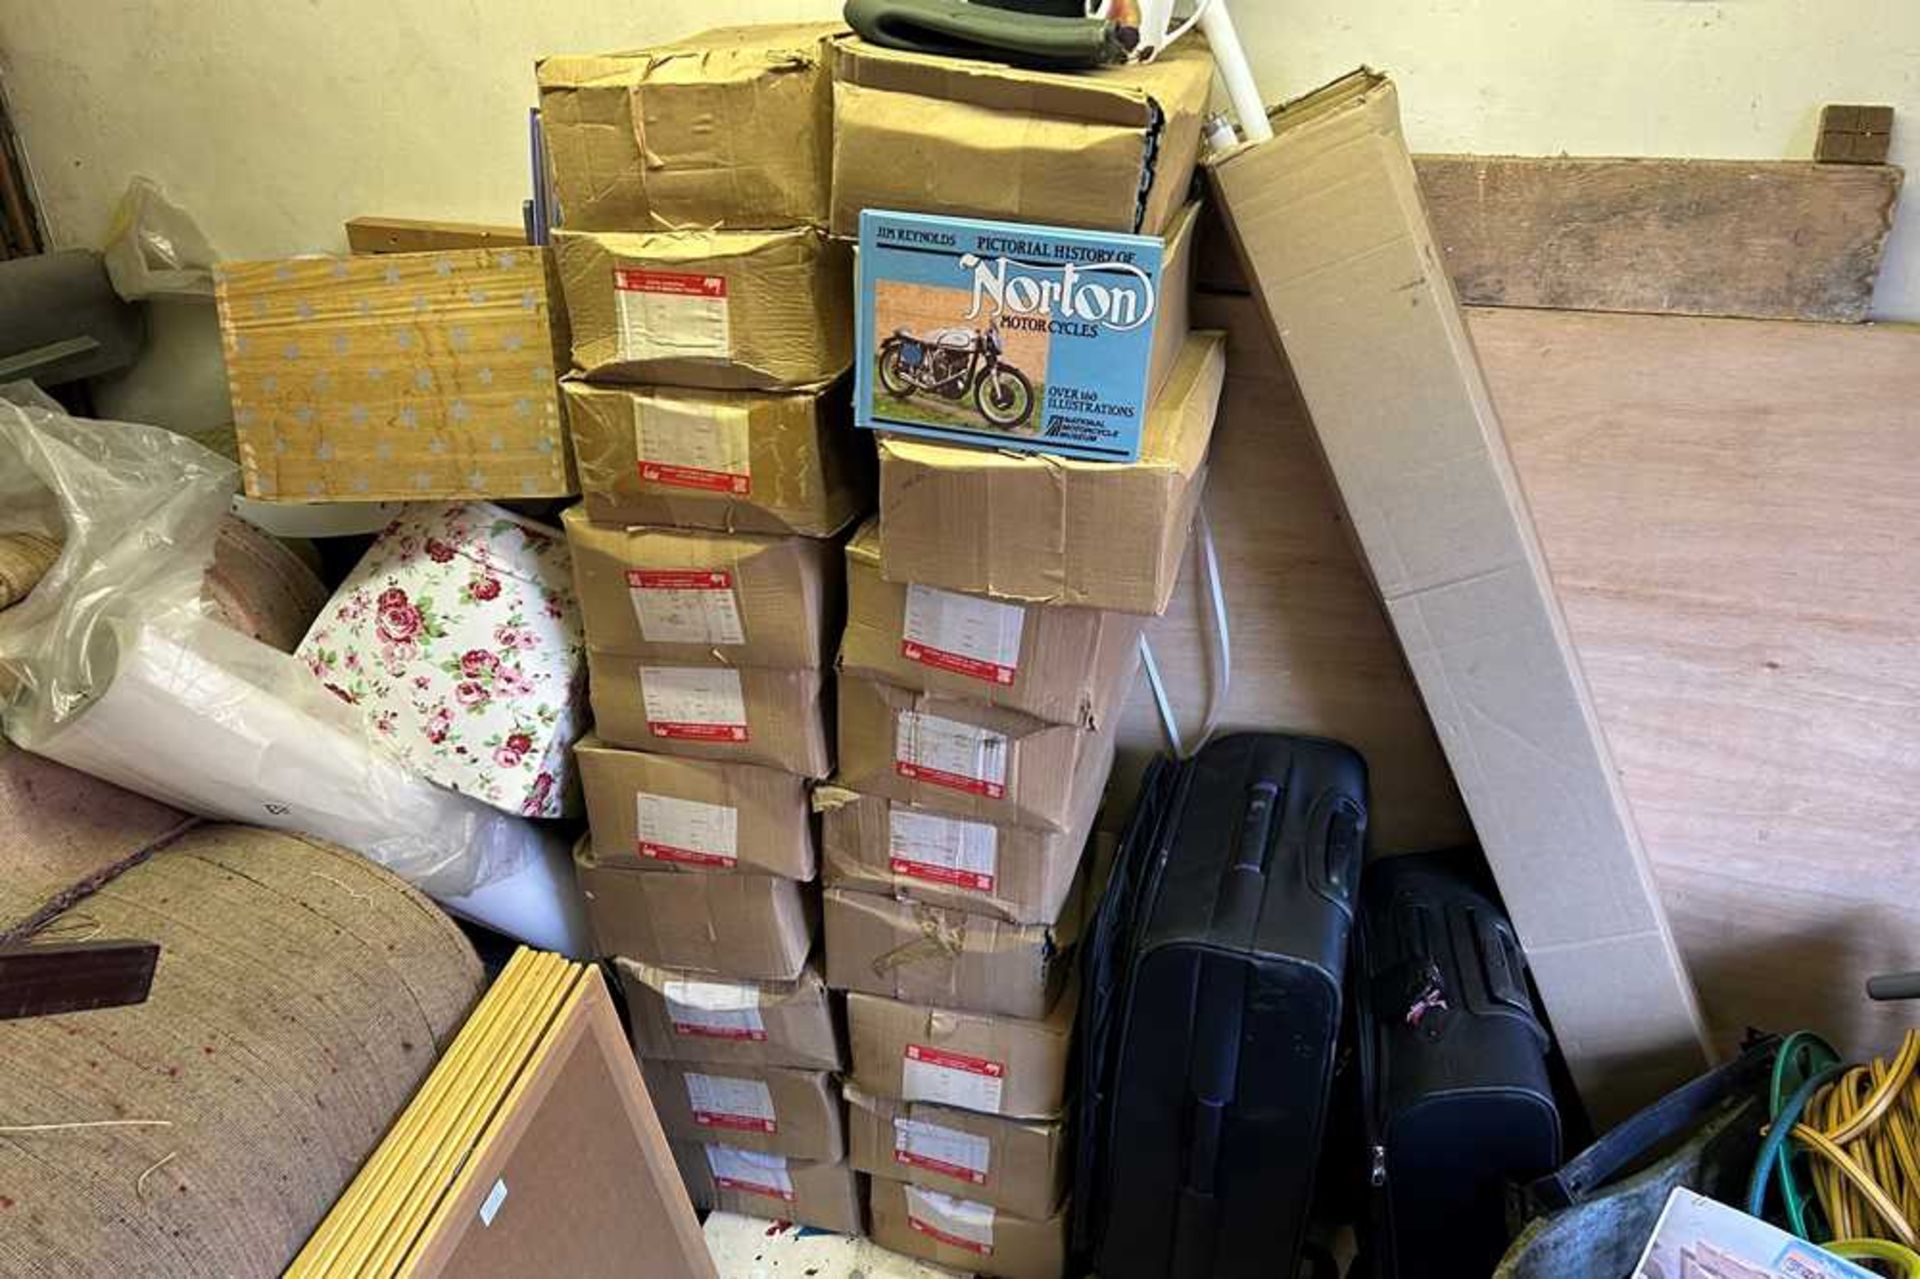 50 Boxes of Books 'Pictorial History of Norton Motorcycles' by Jim Reynolds - Image 2 of 3